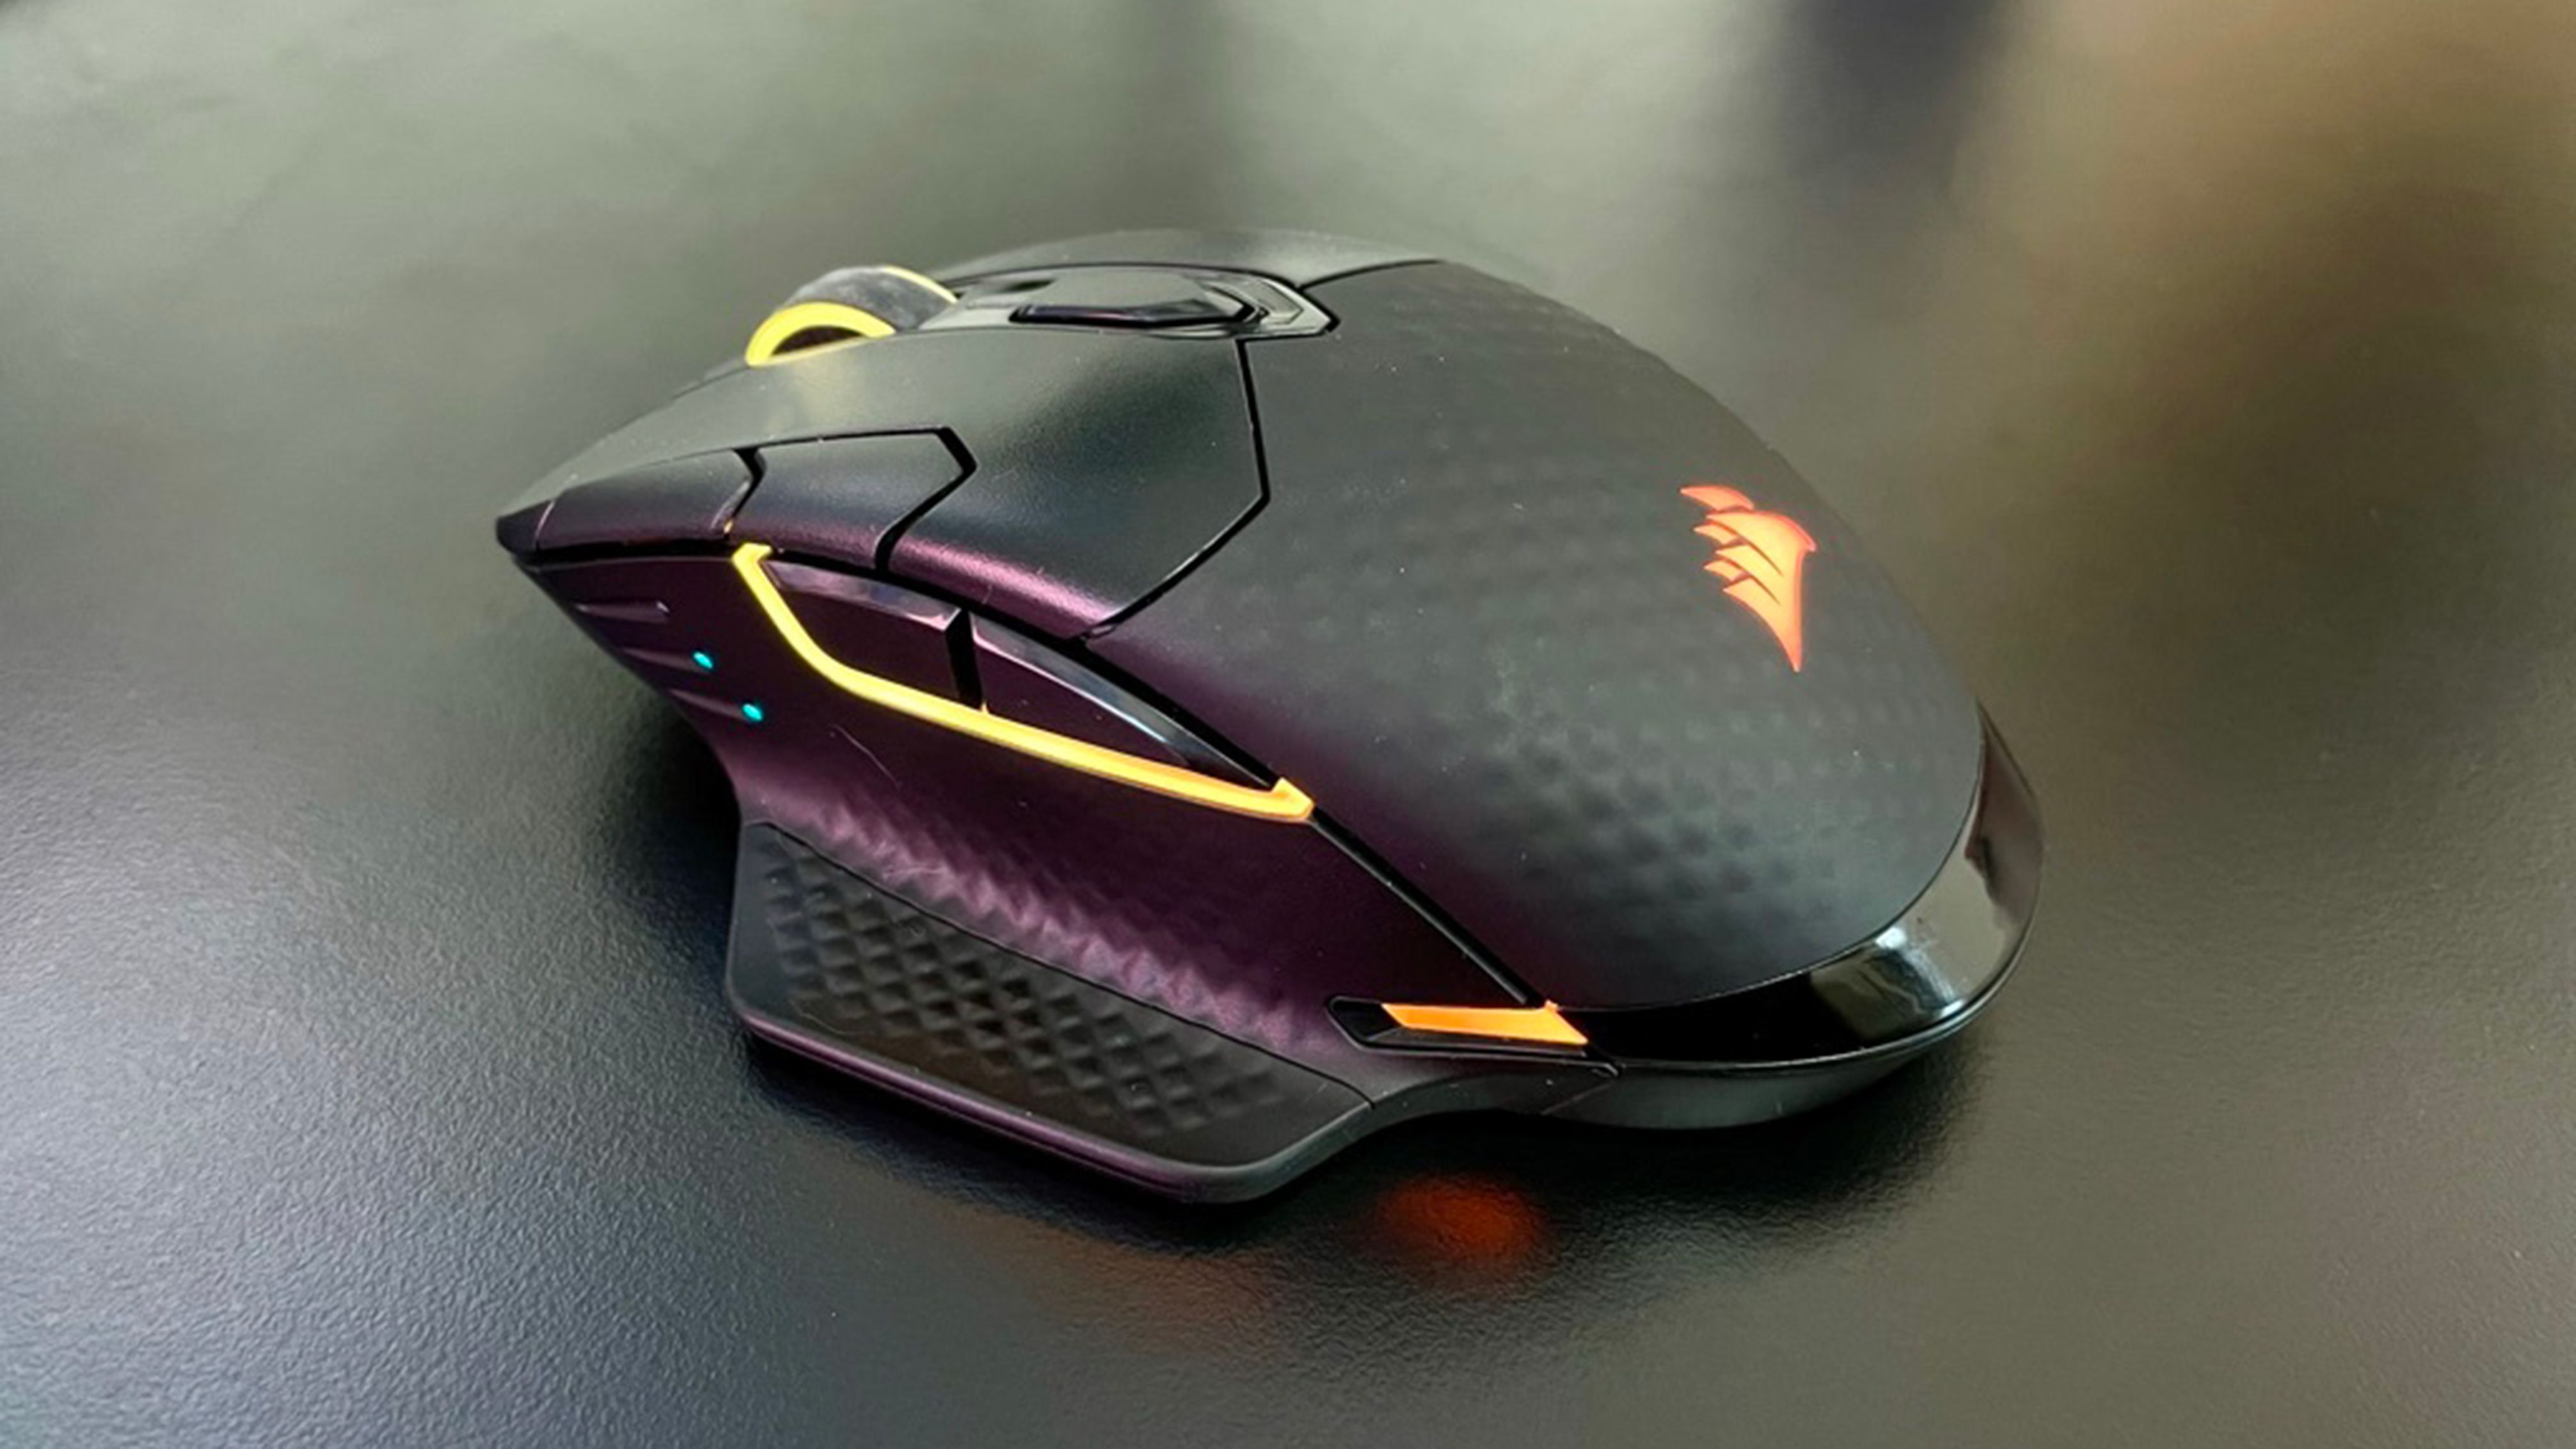 Best gaming mouse 2023: DF's top wired and wireless gaming mice